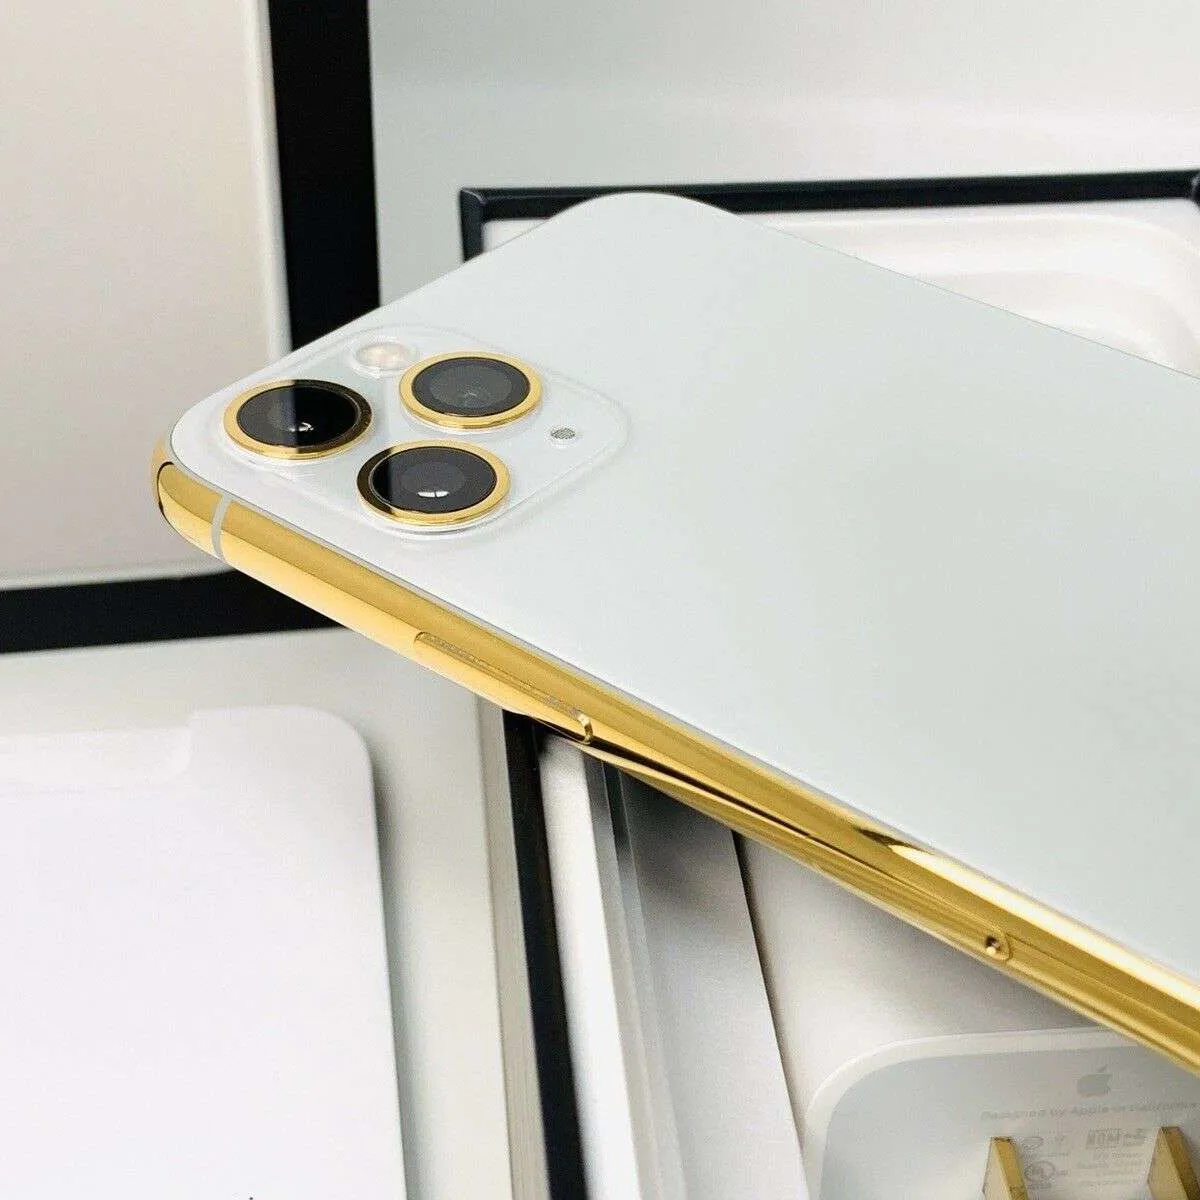 24K Gold Plated Apple iPhone 11 Pro Max - 512GB Silver Unlocked photo 1